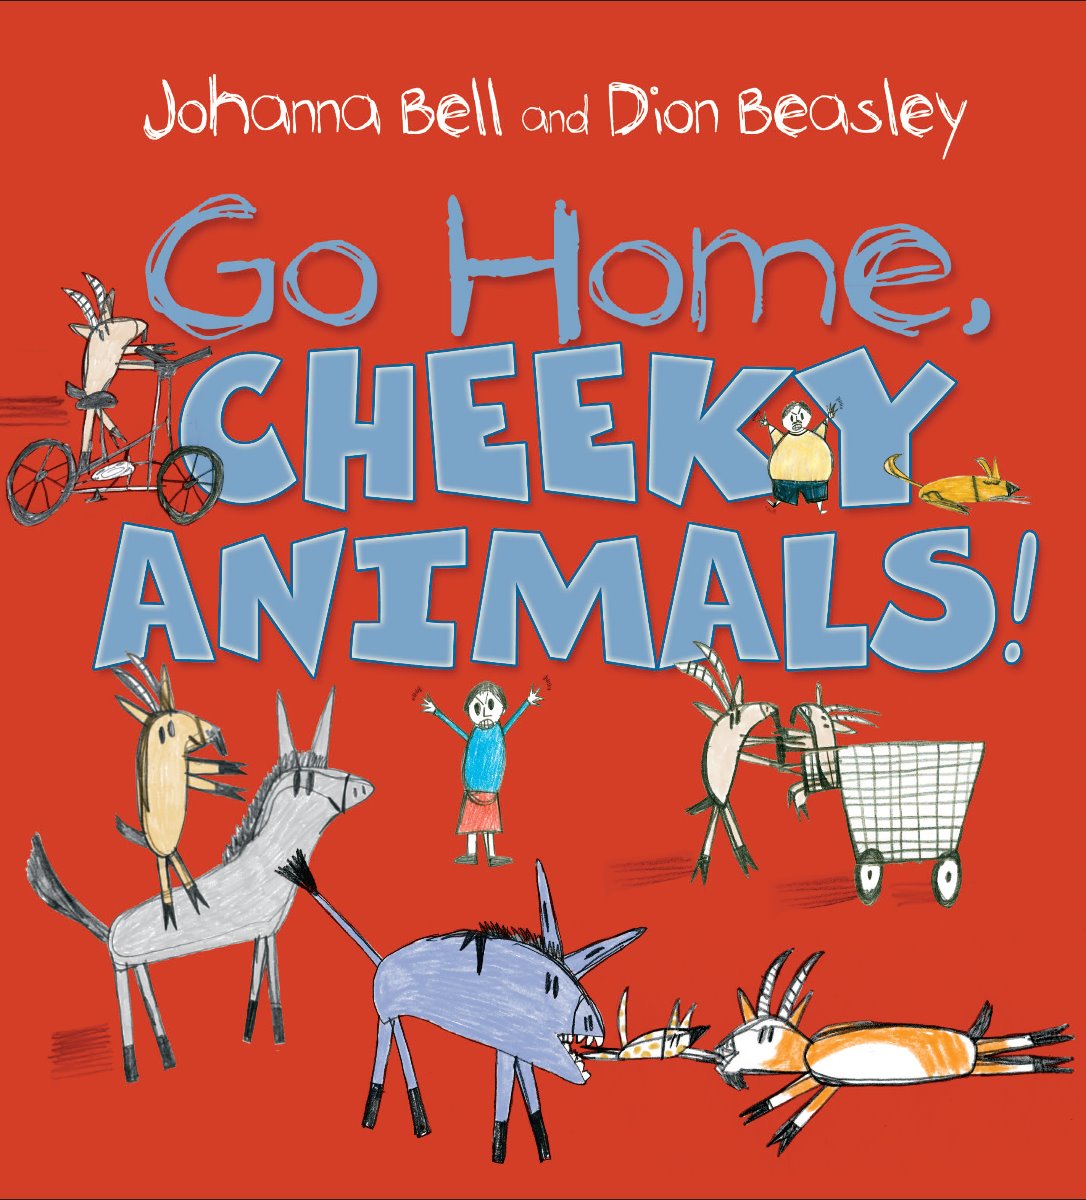 Go Home Cheeky Animals - Bell and beasley HB